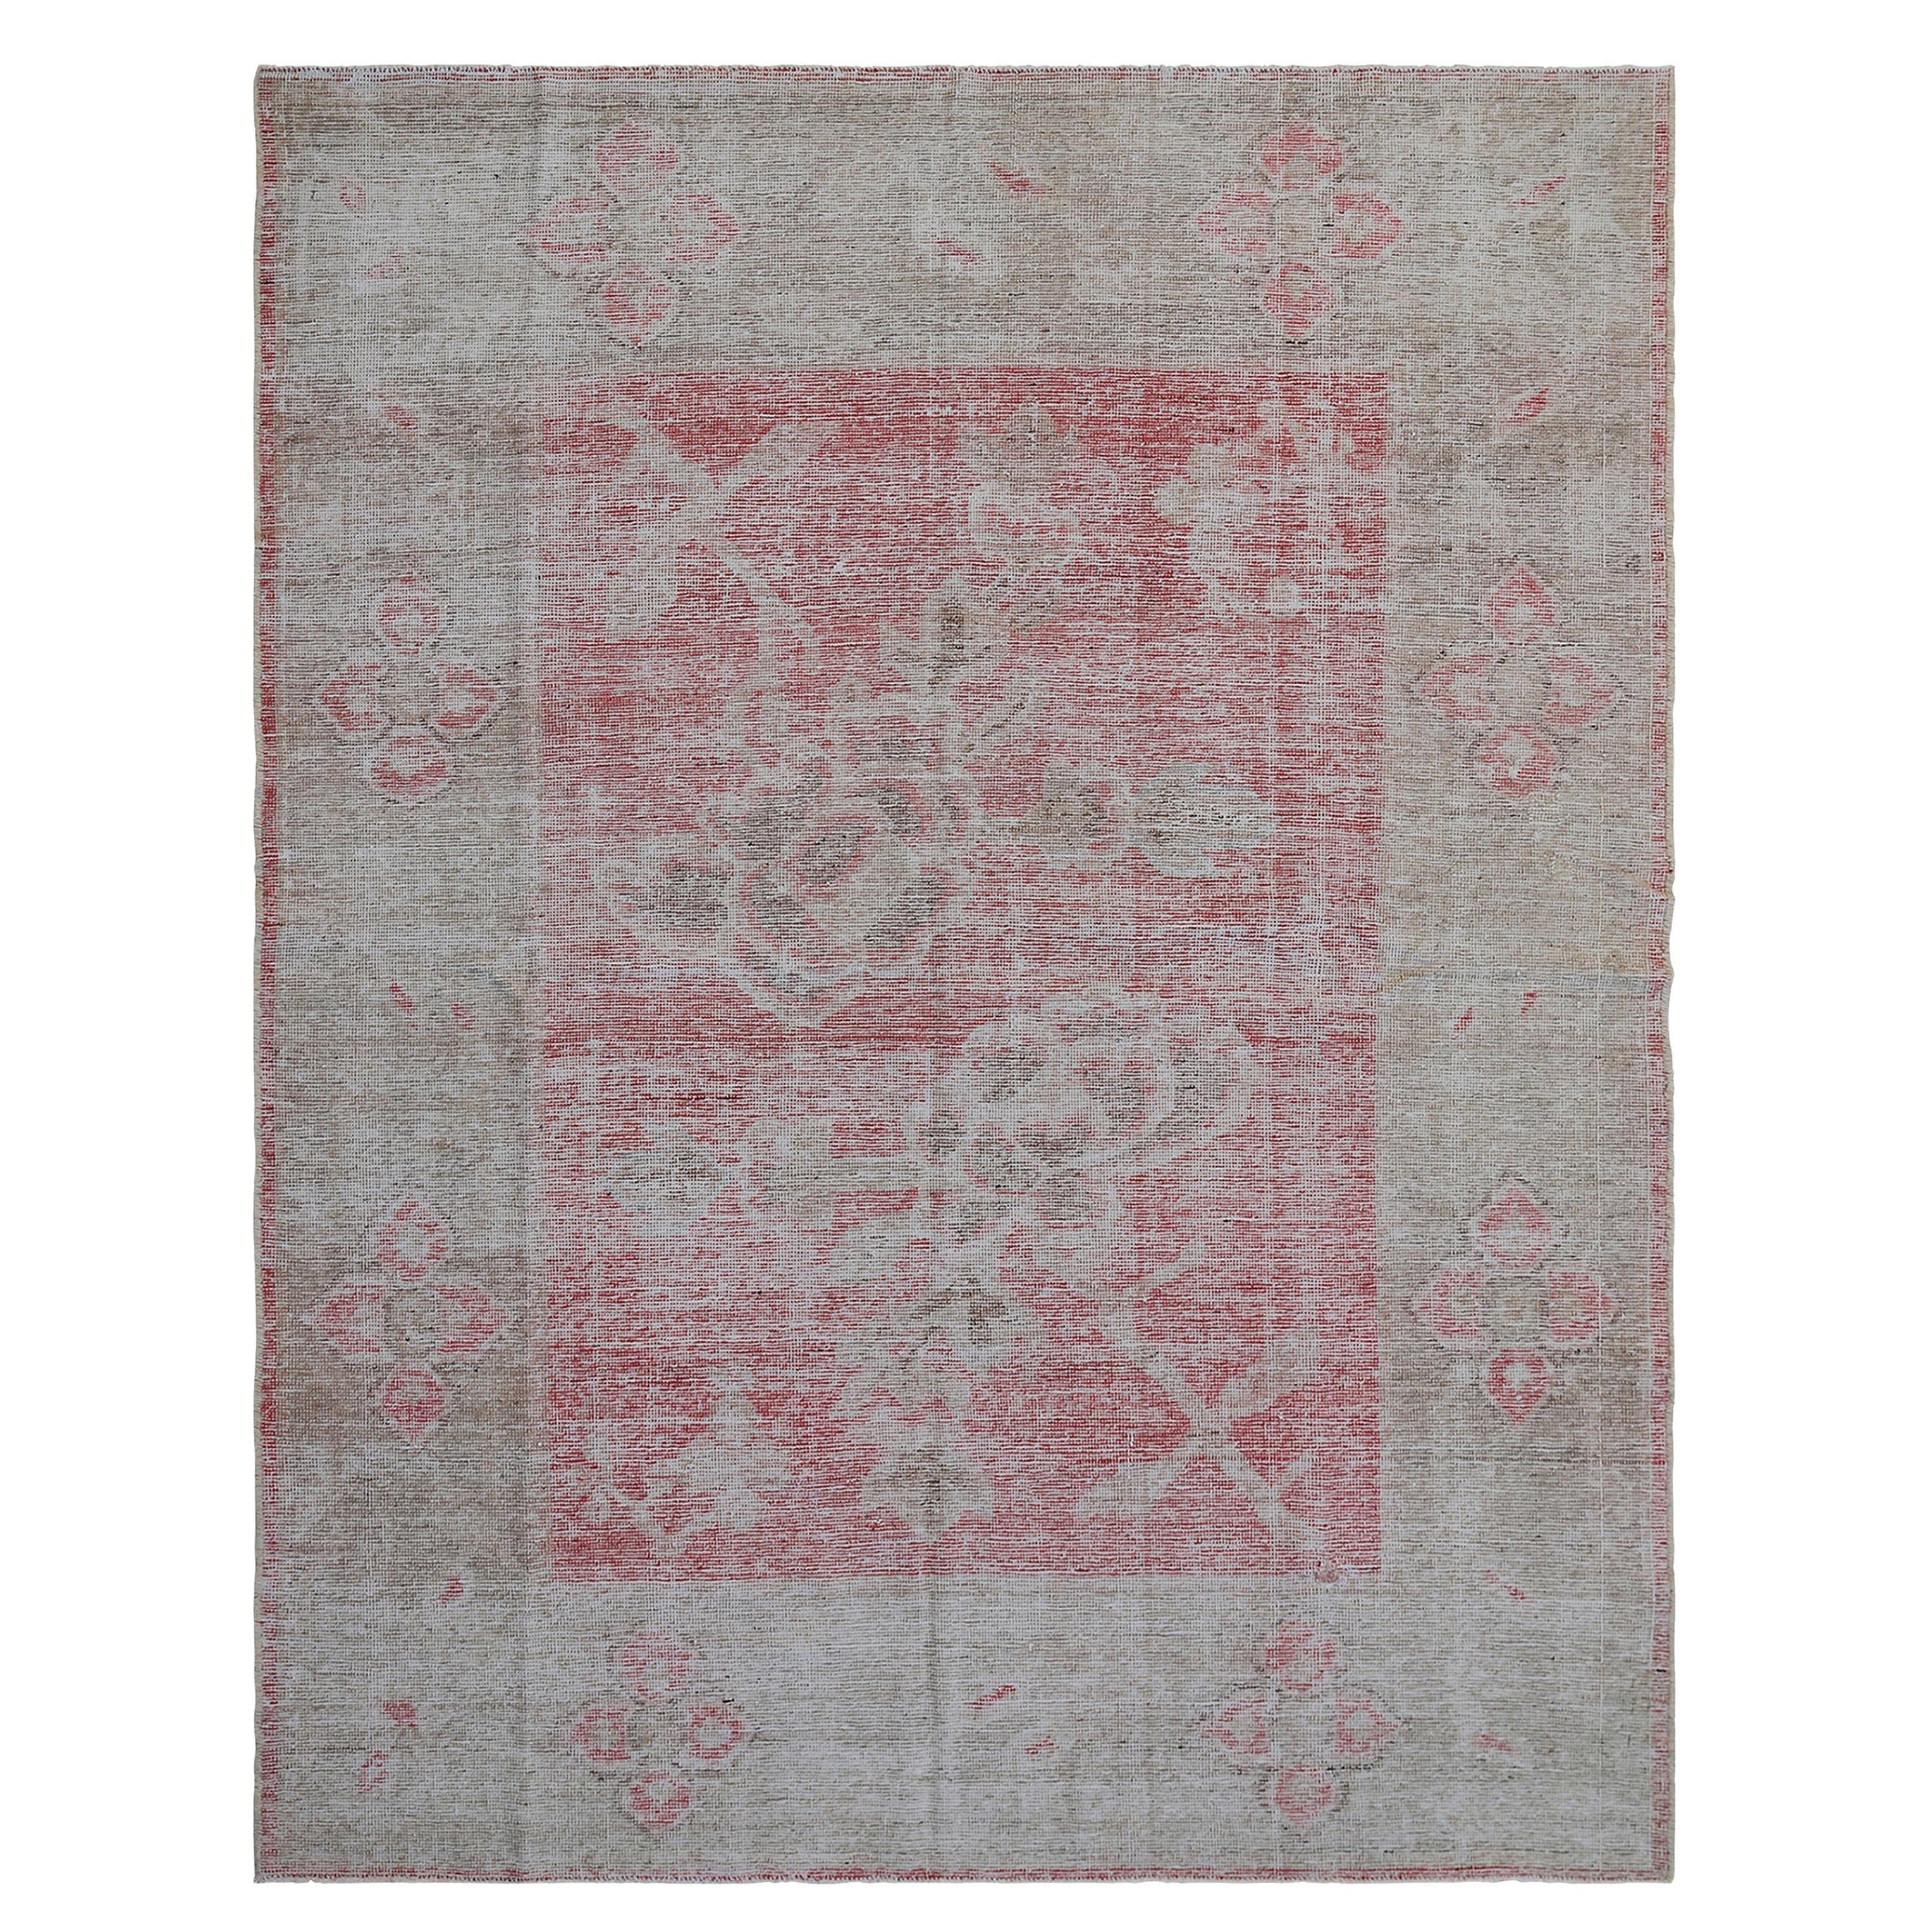 abc carpet Pink and Grey Vintage Wool Cotton Blend Rug - 4'10" x 6'7" For Sale